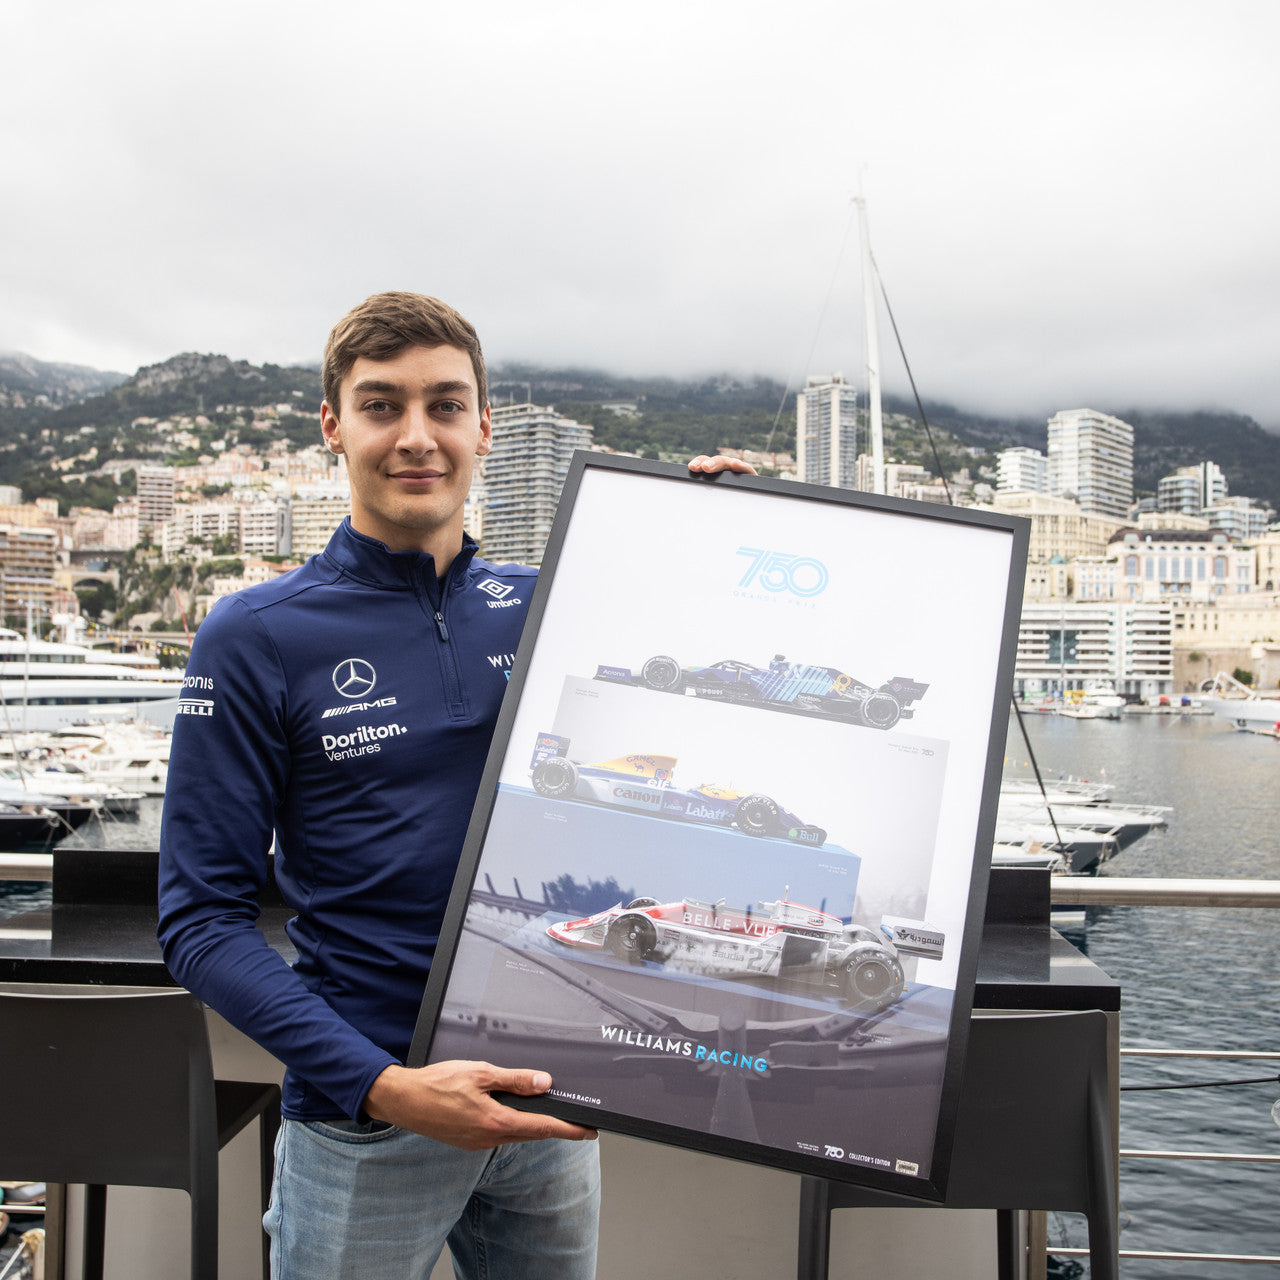 George Russell and Nicholas Latifi - 750 Grands Prix | Signed